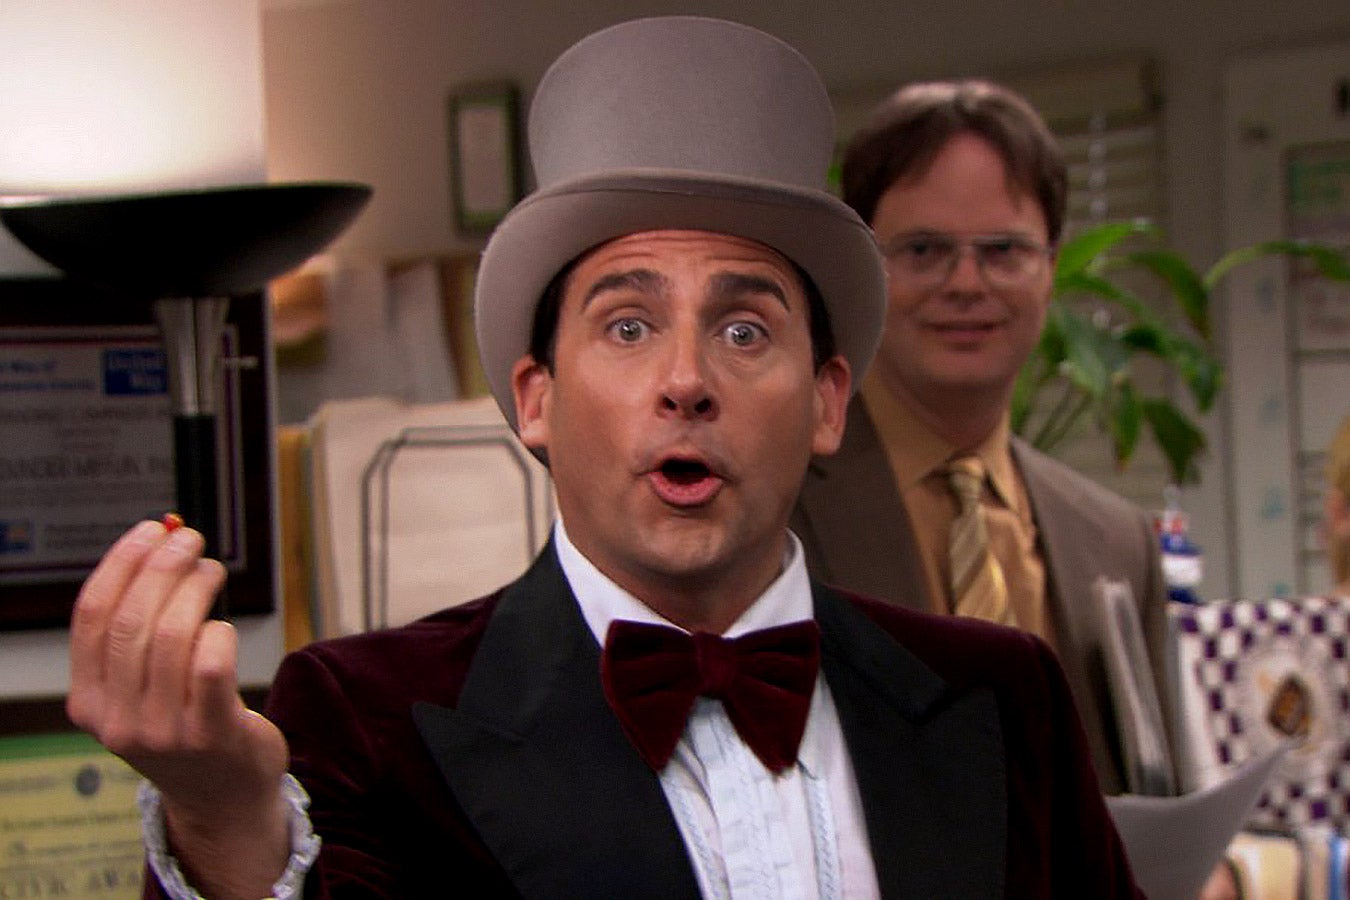 Steve Carell in The Office wears a bowler hat and bow tie.